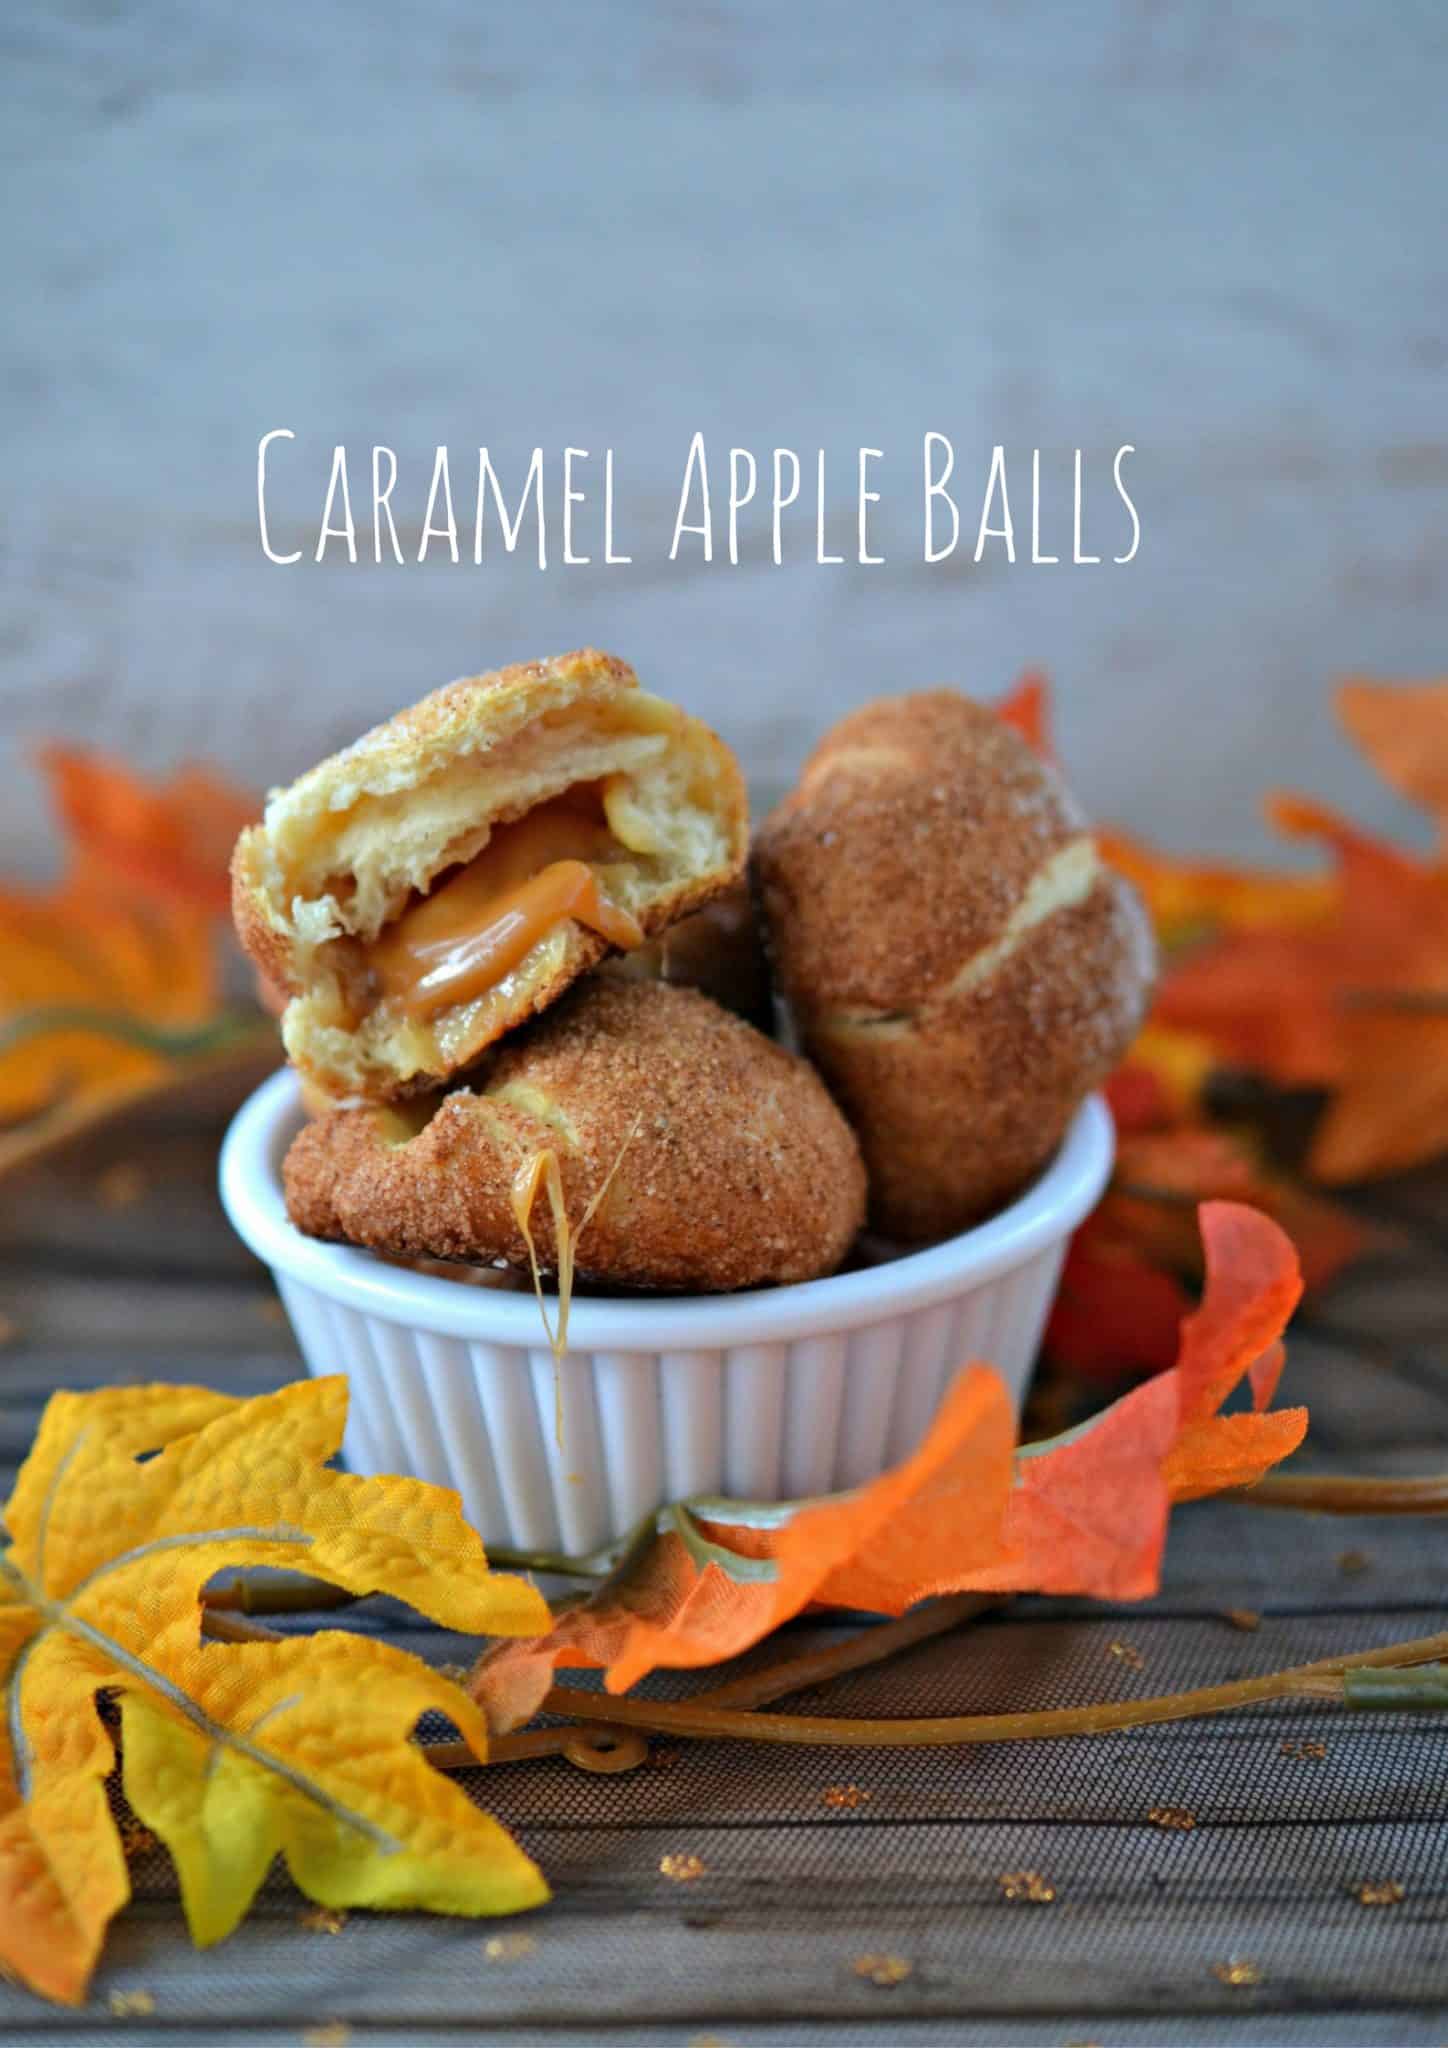 Dough balls filled with caramel and apples.